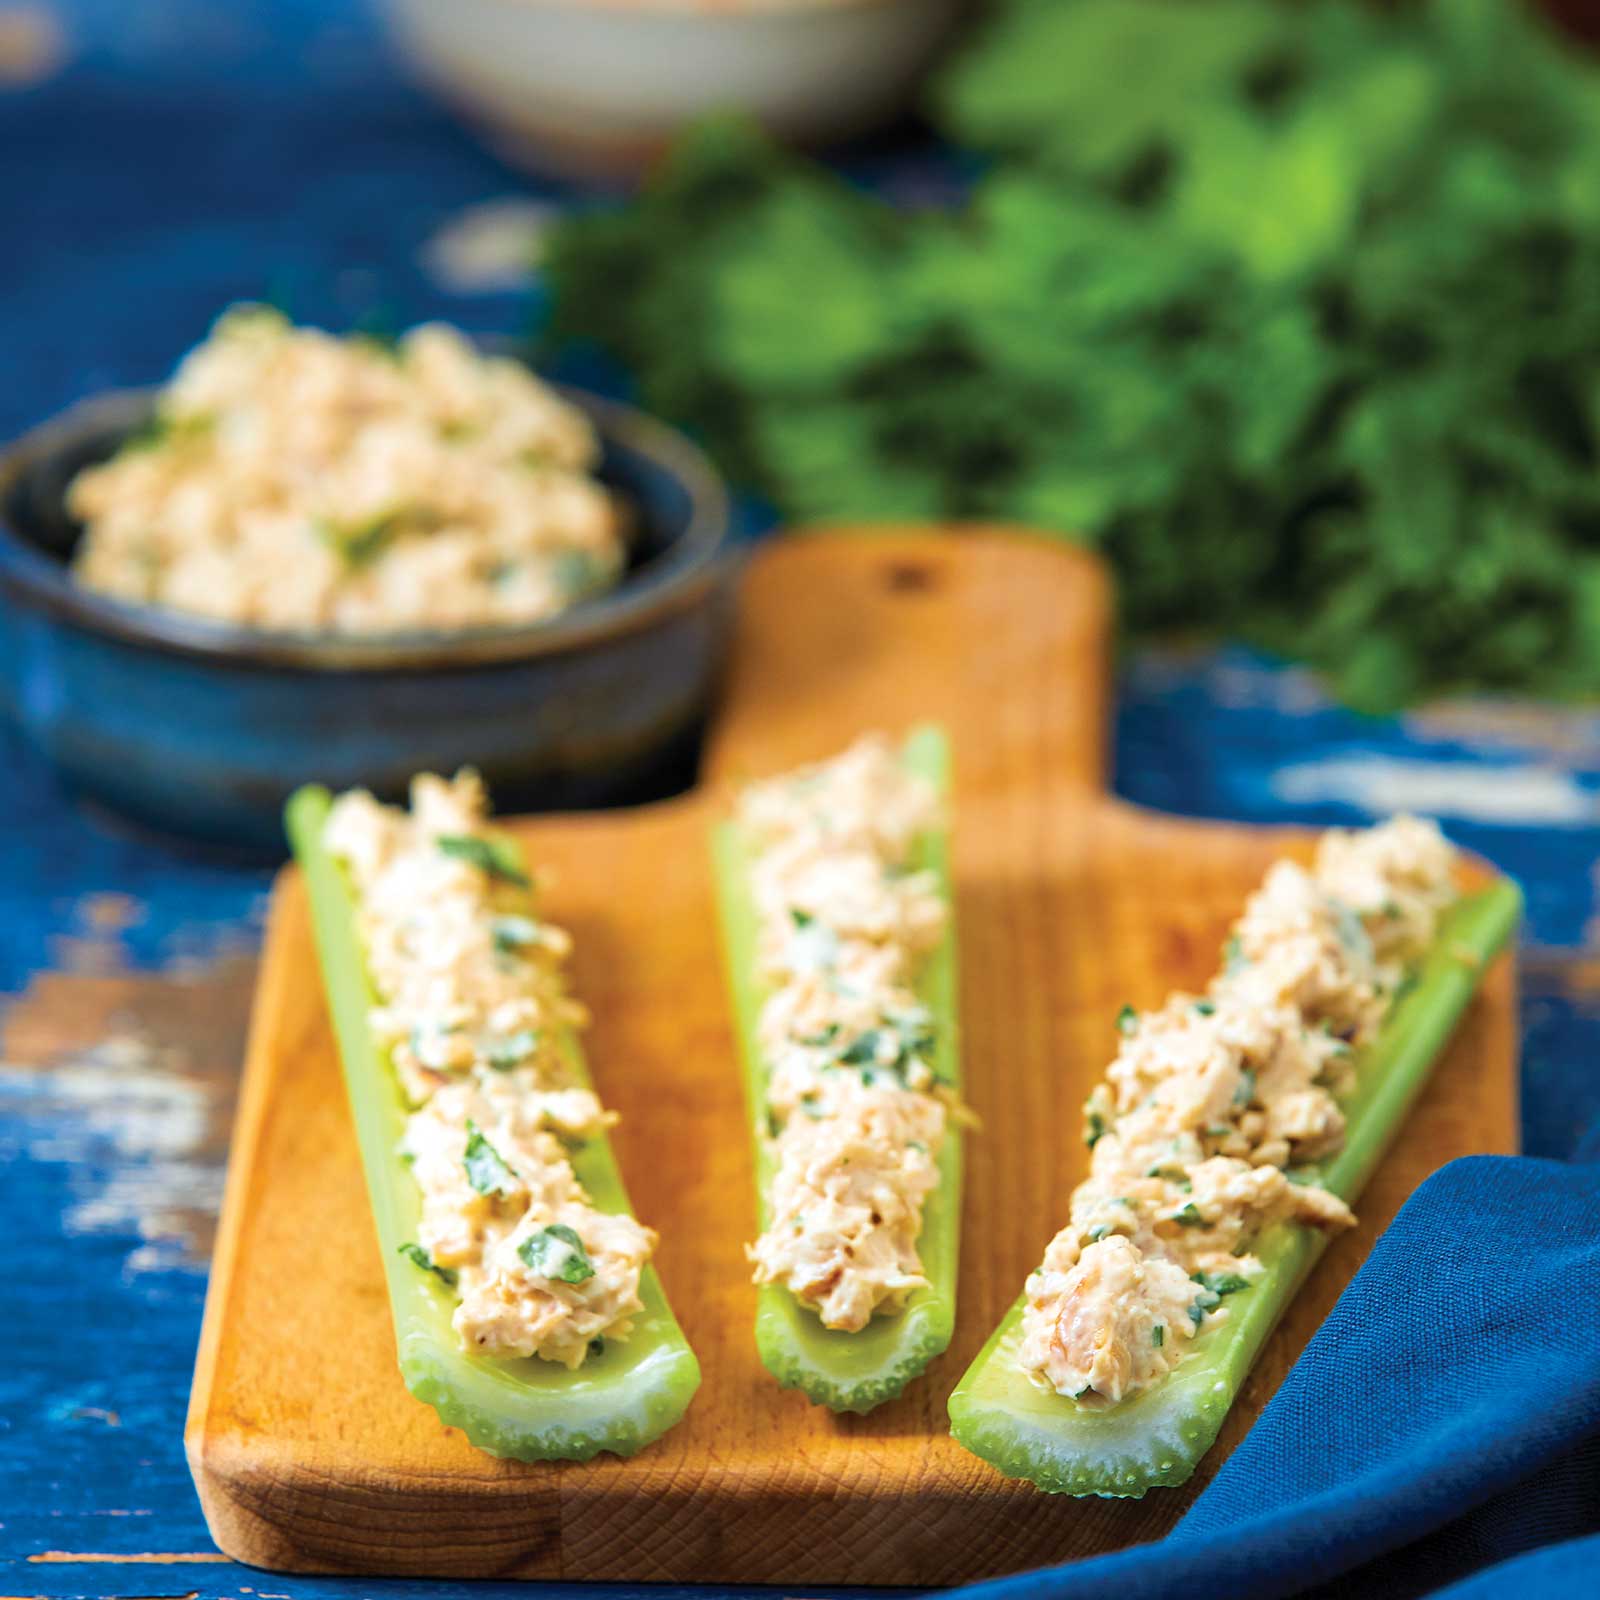 Three pieces of celery rest on a wooden chopping board. The celery is filled with spicy chicken and topped with chopped parsley. A bowl of more spicy chicken rests at the back next to a bunch of flat-leaf parsley.